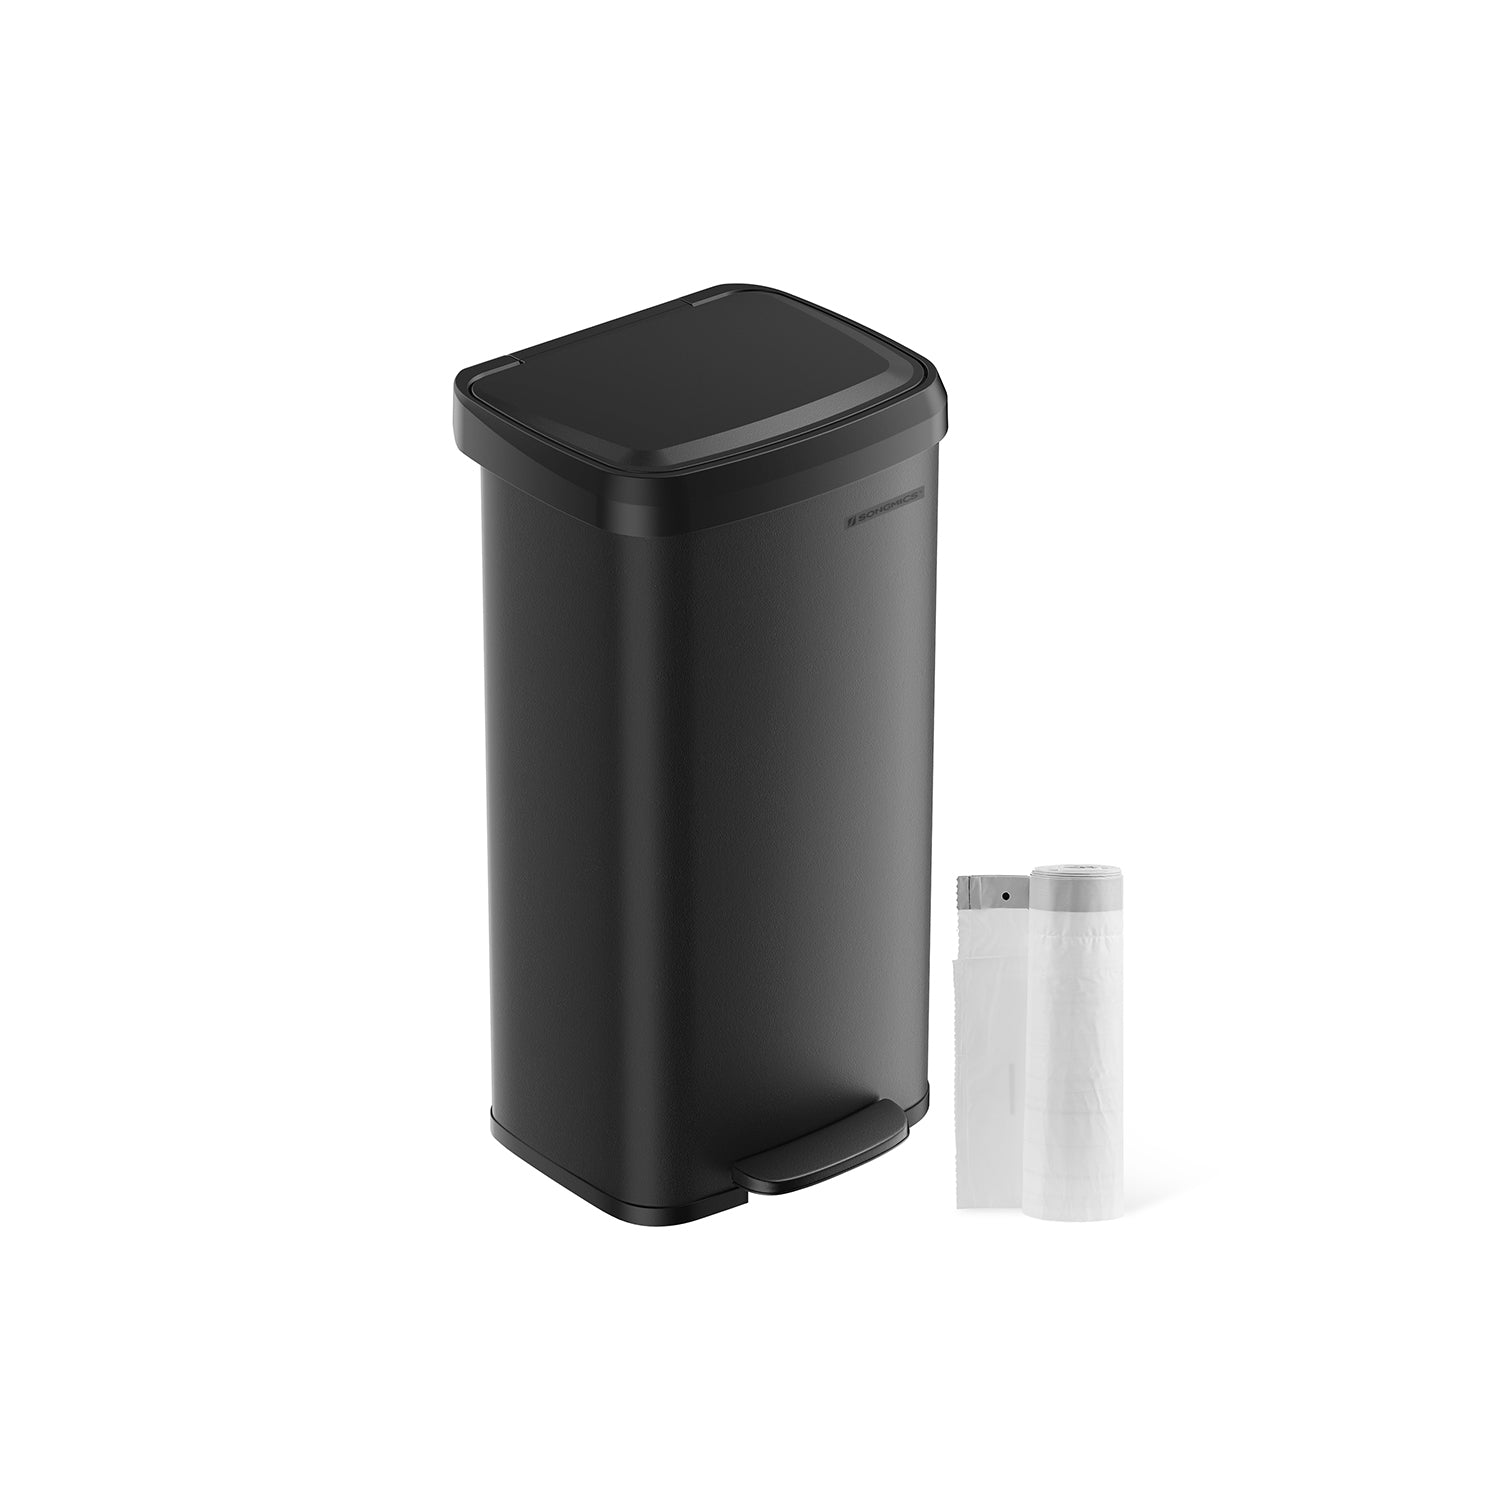 SONGMICS 13 Gallon/ 50L Trash Can, Waste Bin, Stainless Steel